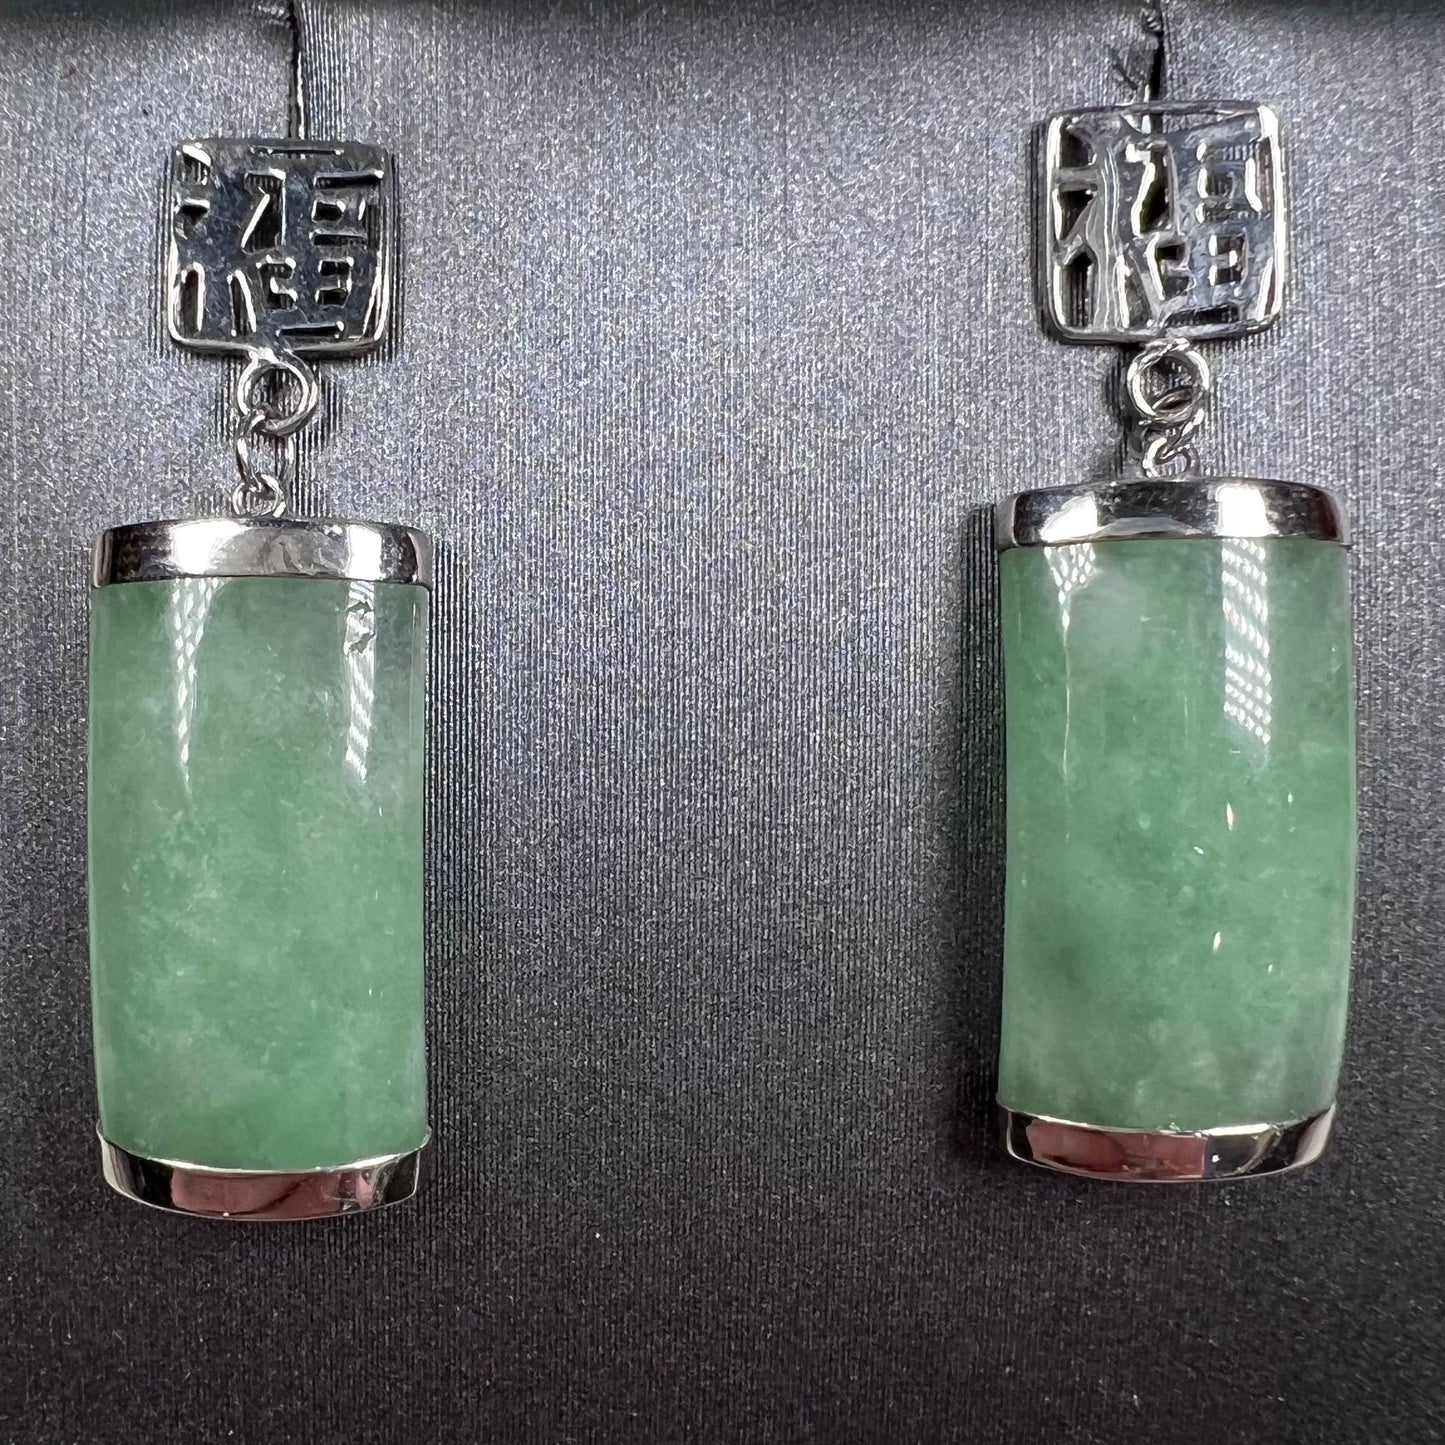 A pair of white gold jadeite dangle earrings with Chinese characters.